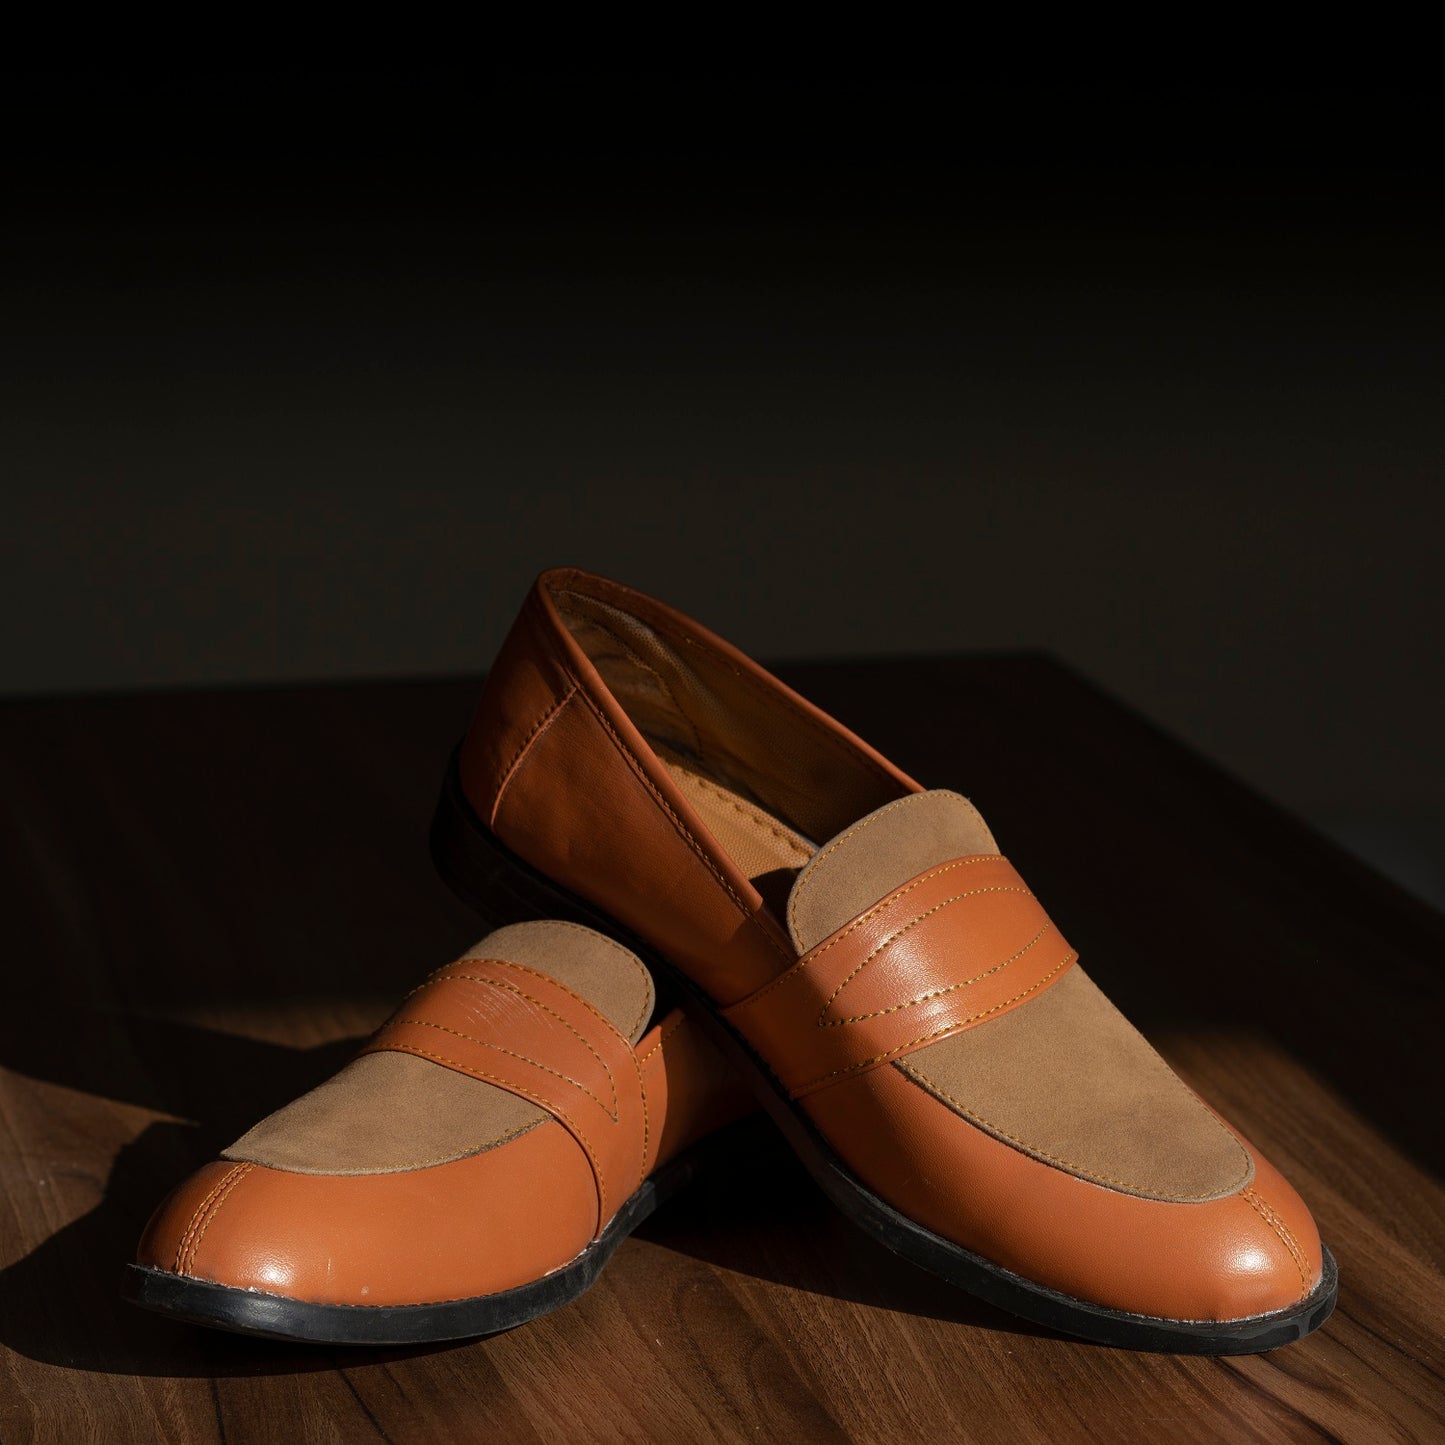 The Aurous NYX Slip On Loafers